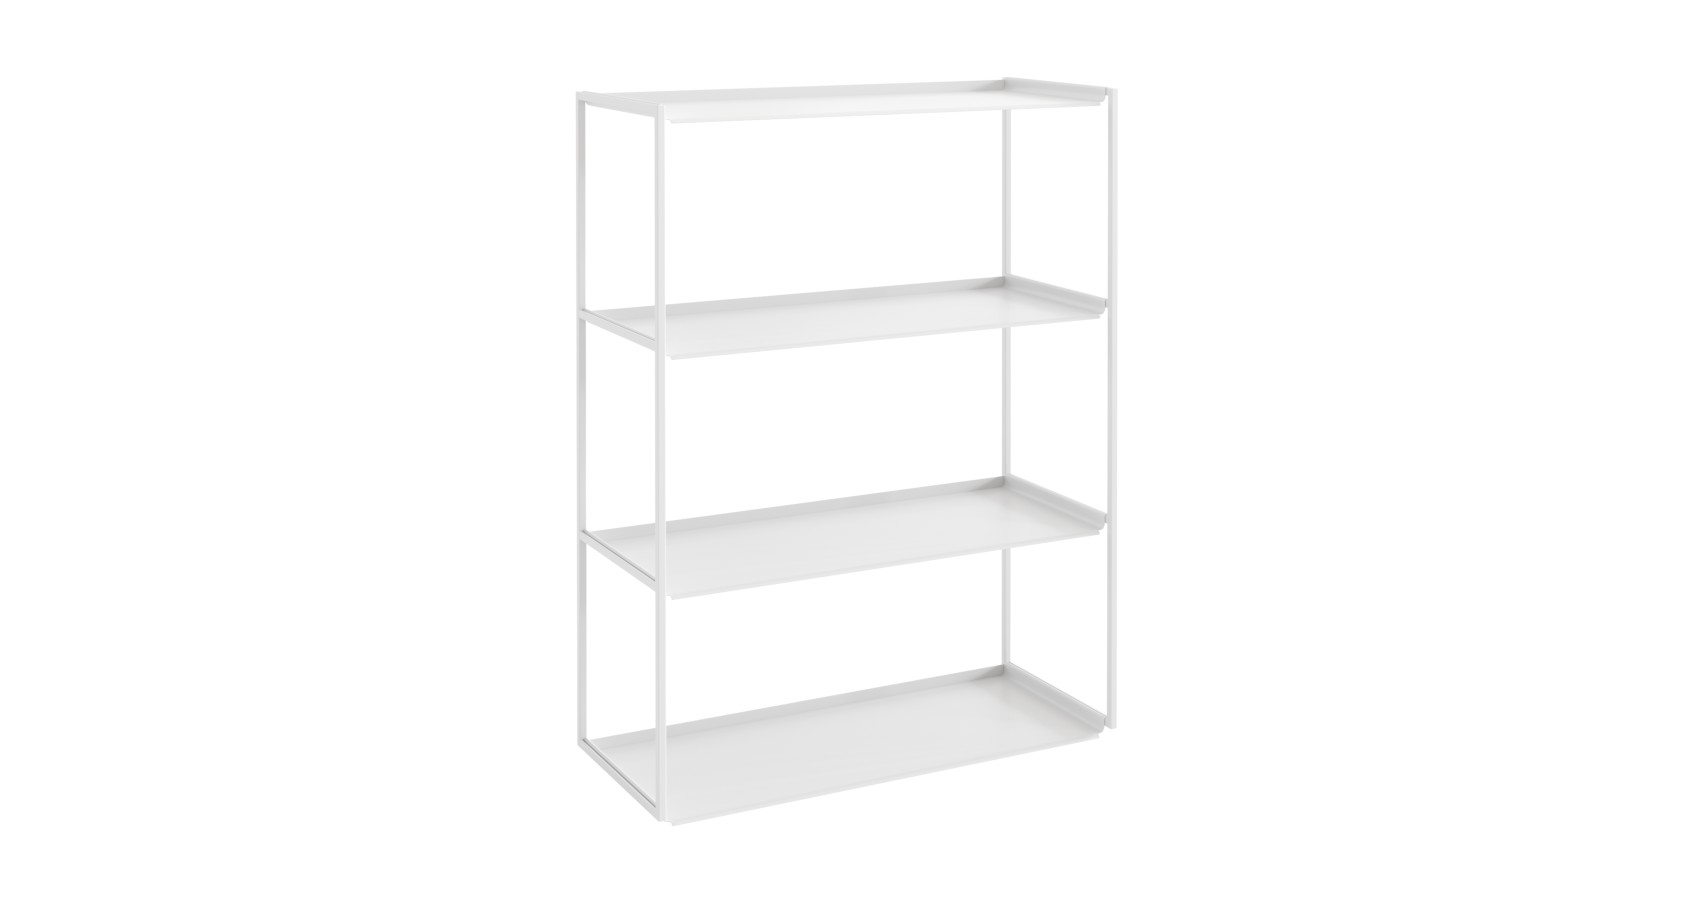 Sash Wall Shelf Triple in white in front view